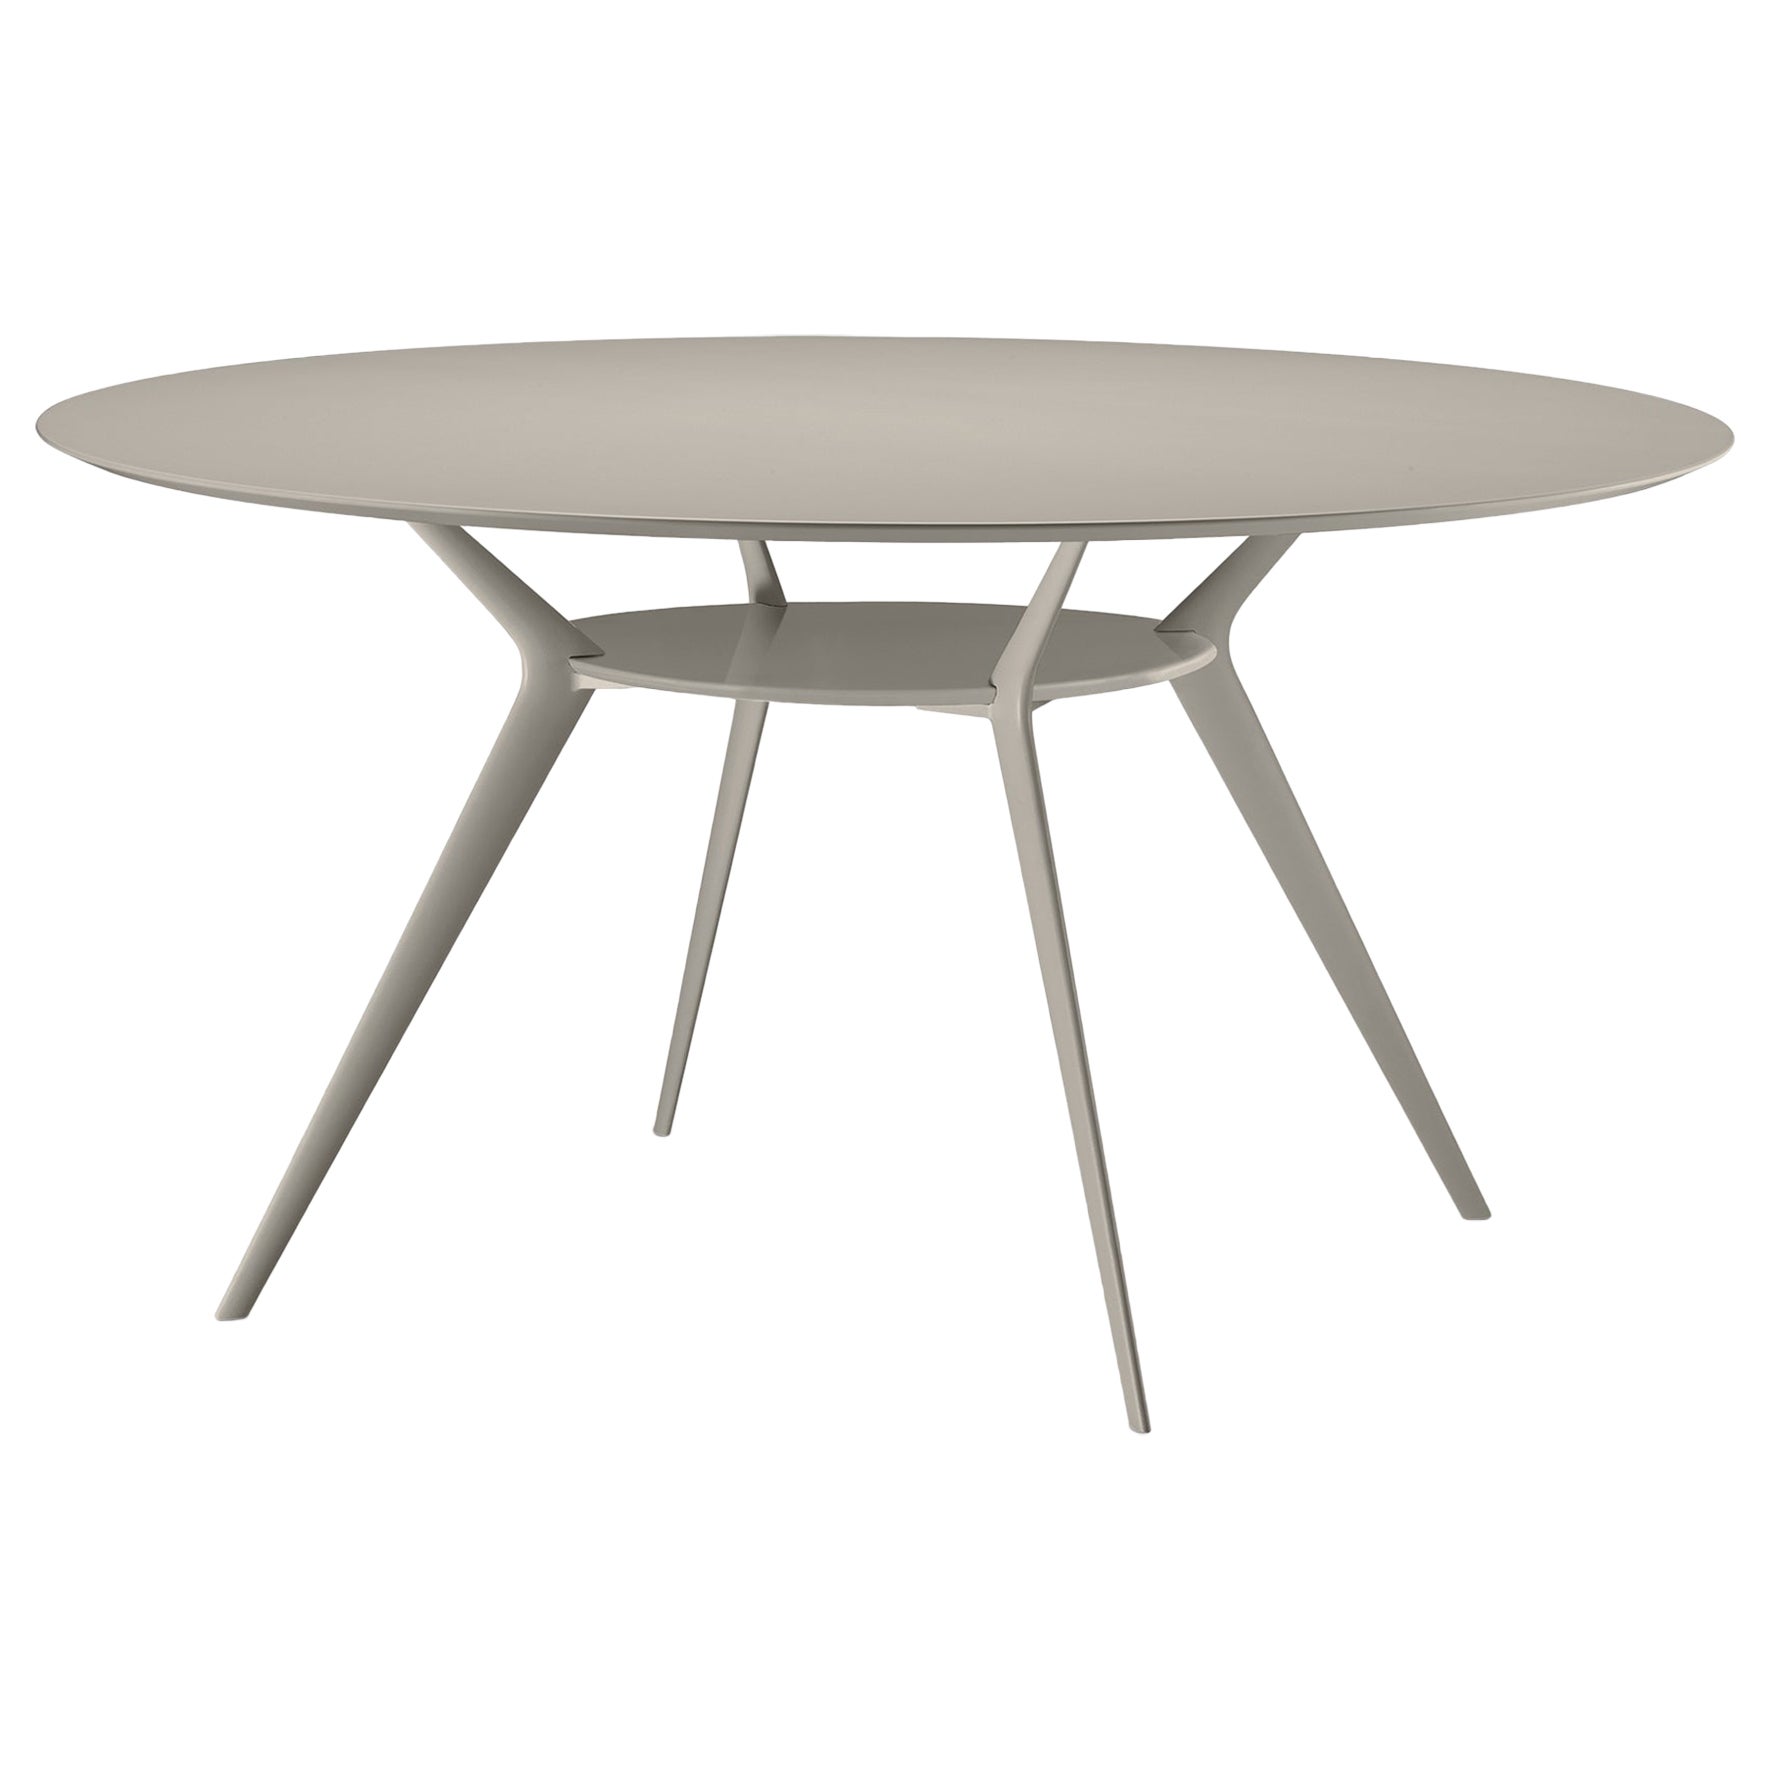 Alias Biplane 403 Table in Sand MDF Top with Sand Lacquered Aluminium Frame For Sale